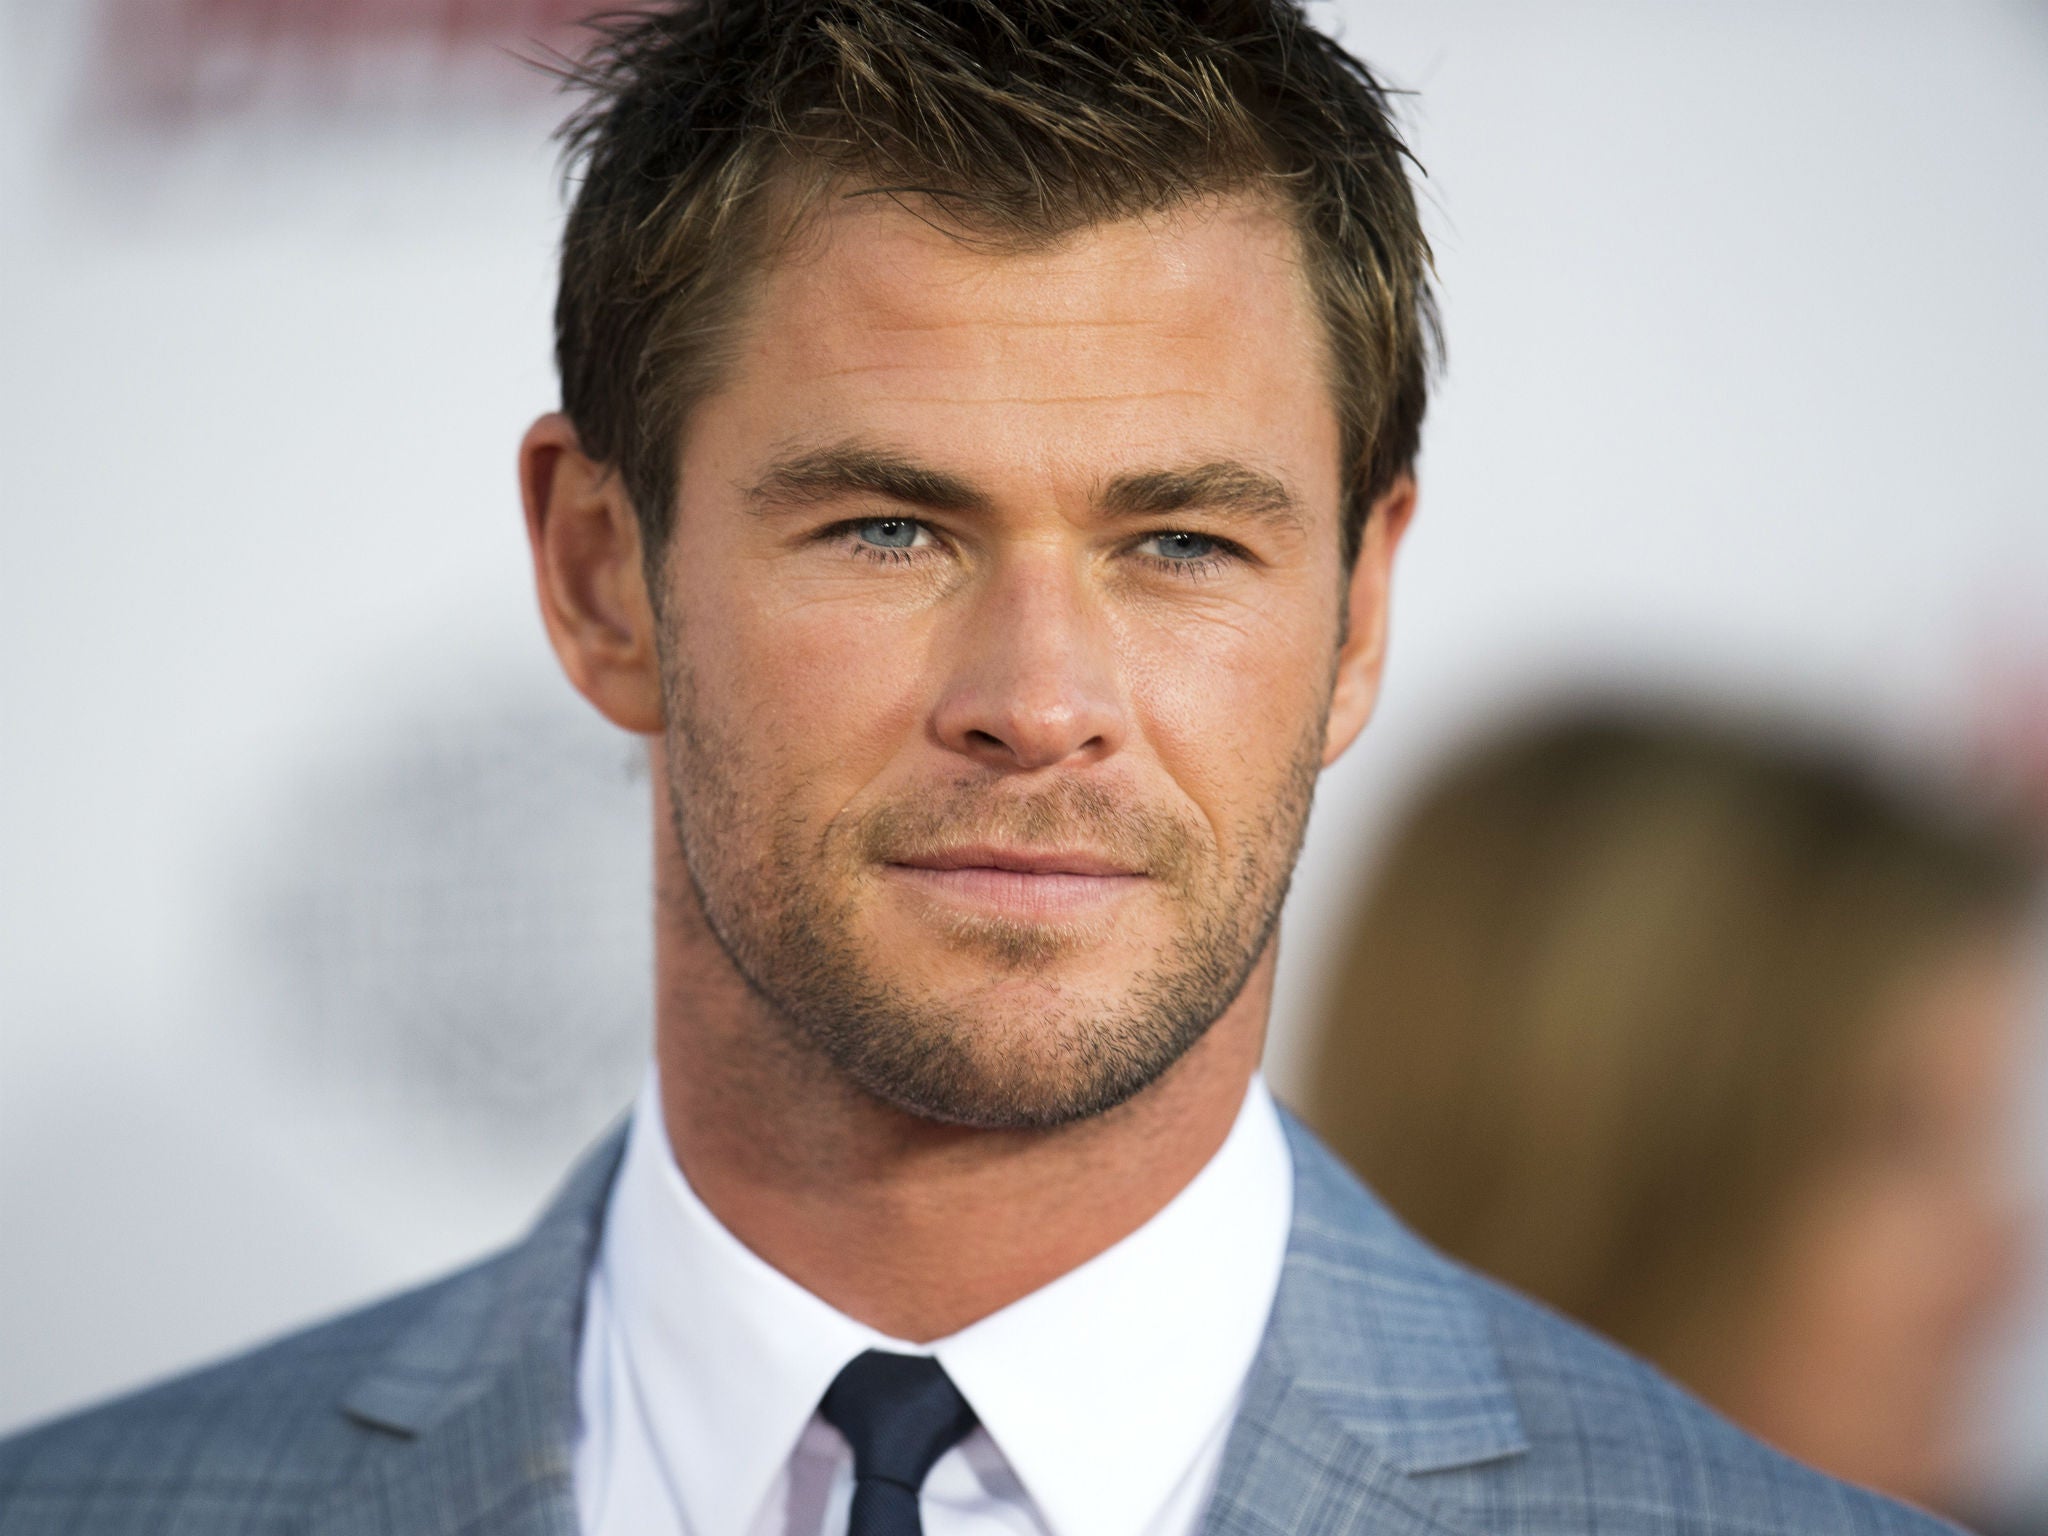 Chris Hemsworth is playing receptionist Kevin in Ghostbusters 3